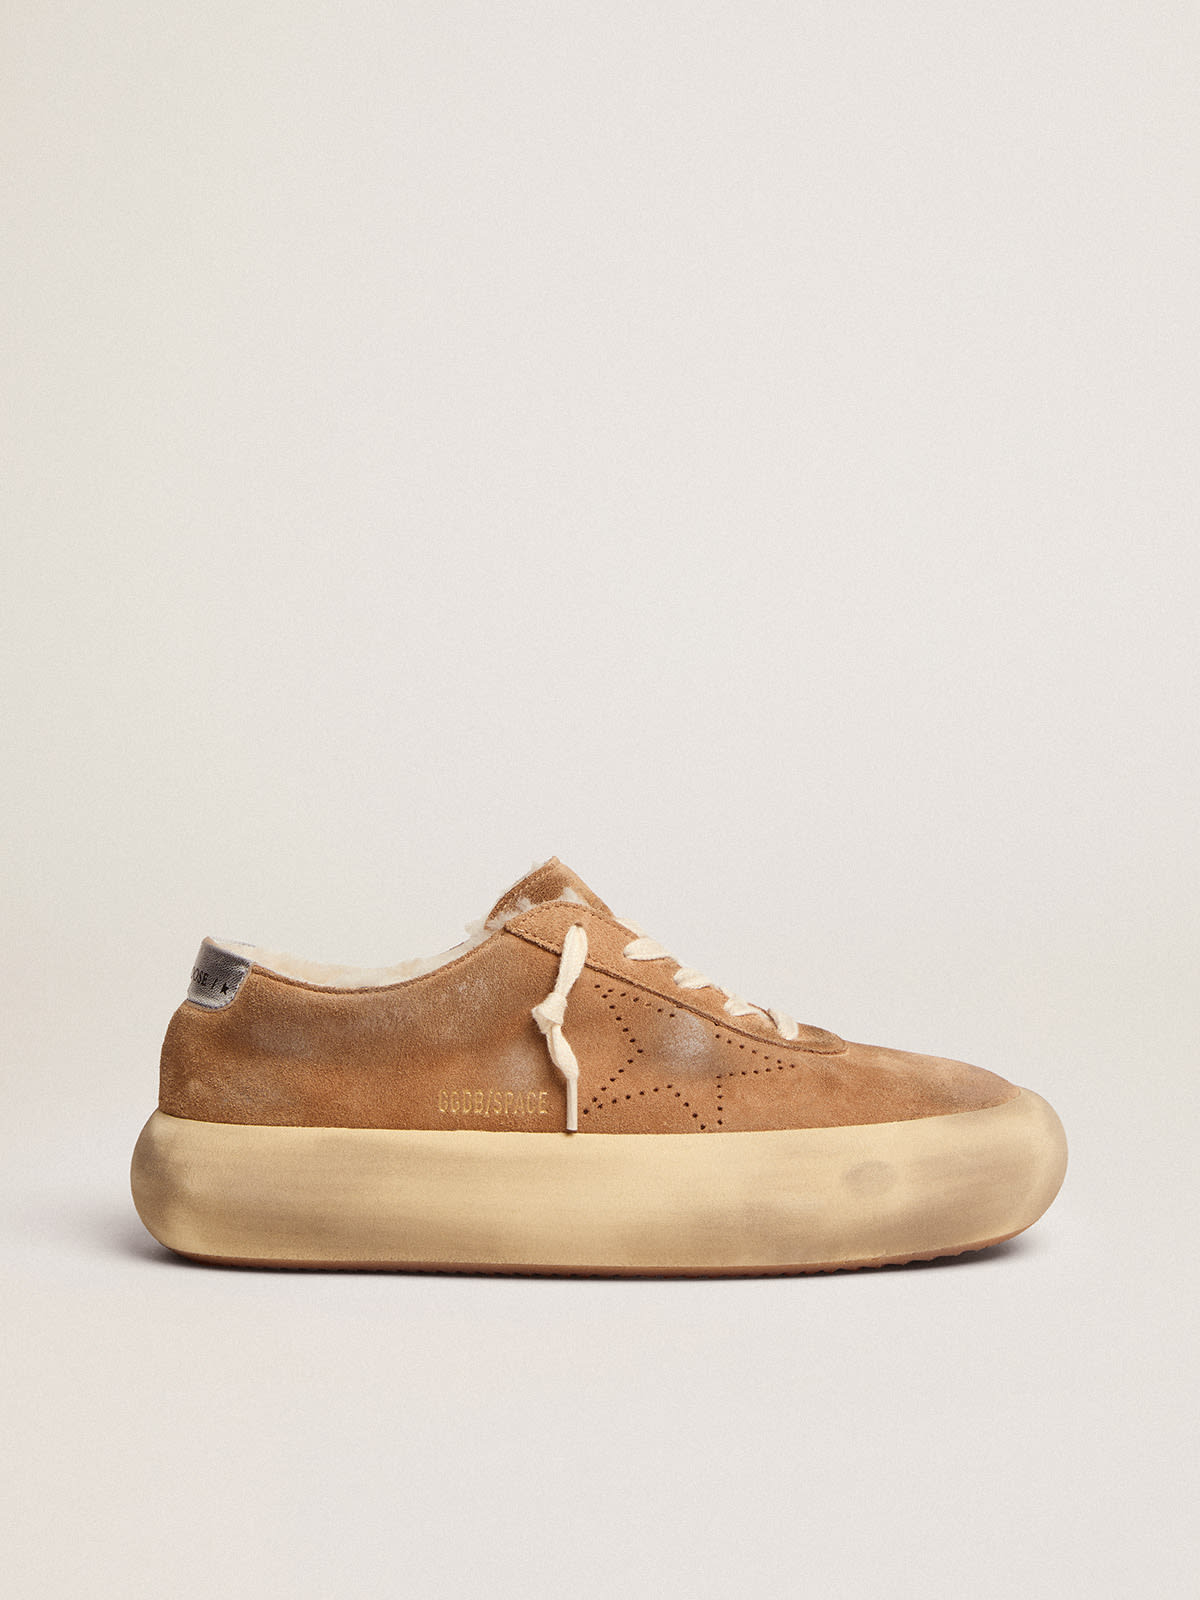 Golden Goose - Space-Star Uomo in suede color tabacco e fodera in shearling in 